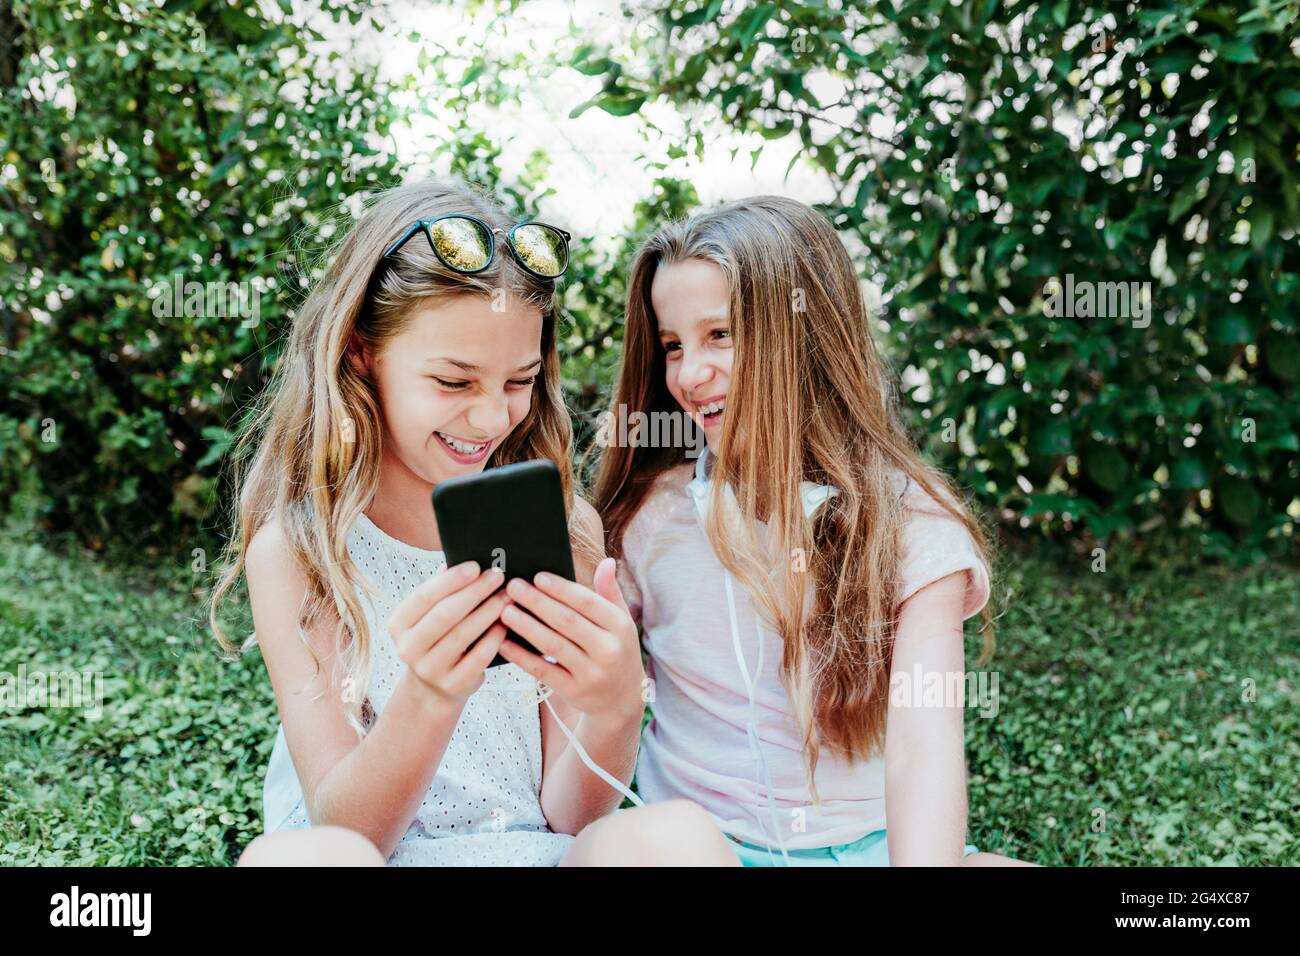 Cheerful girl with friend using mobile phone in garden Stock Photo